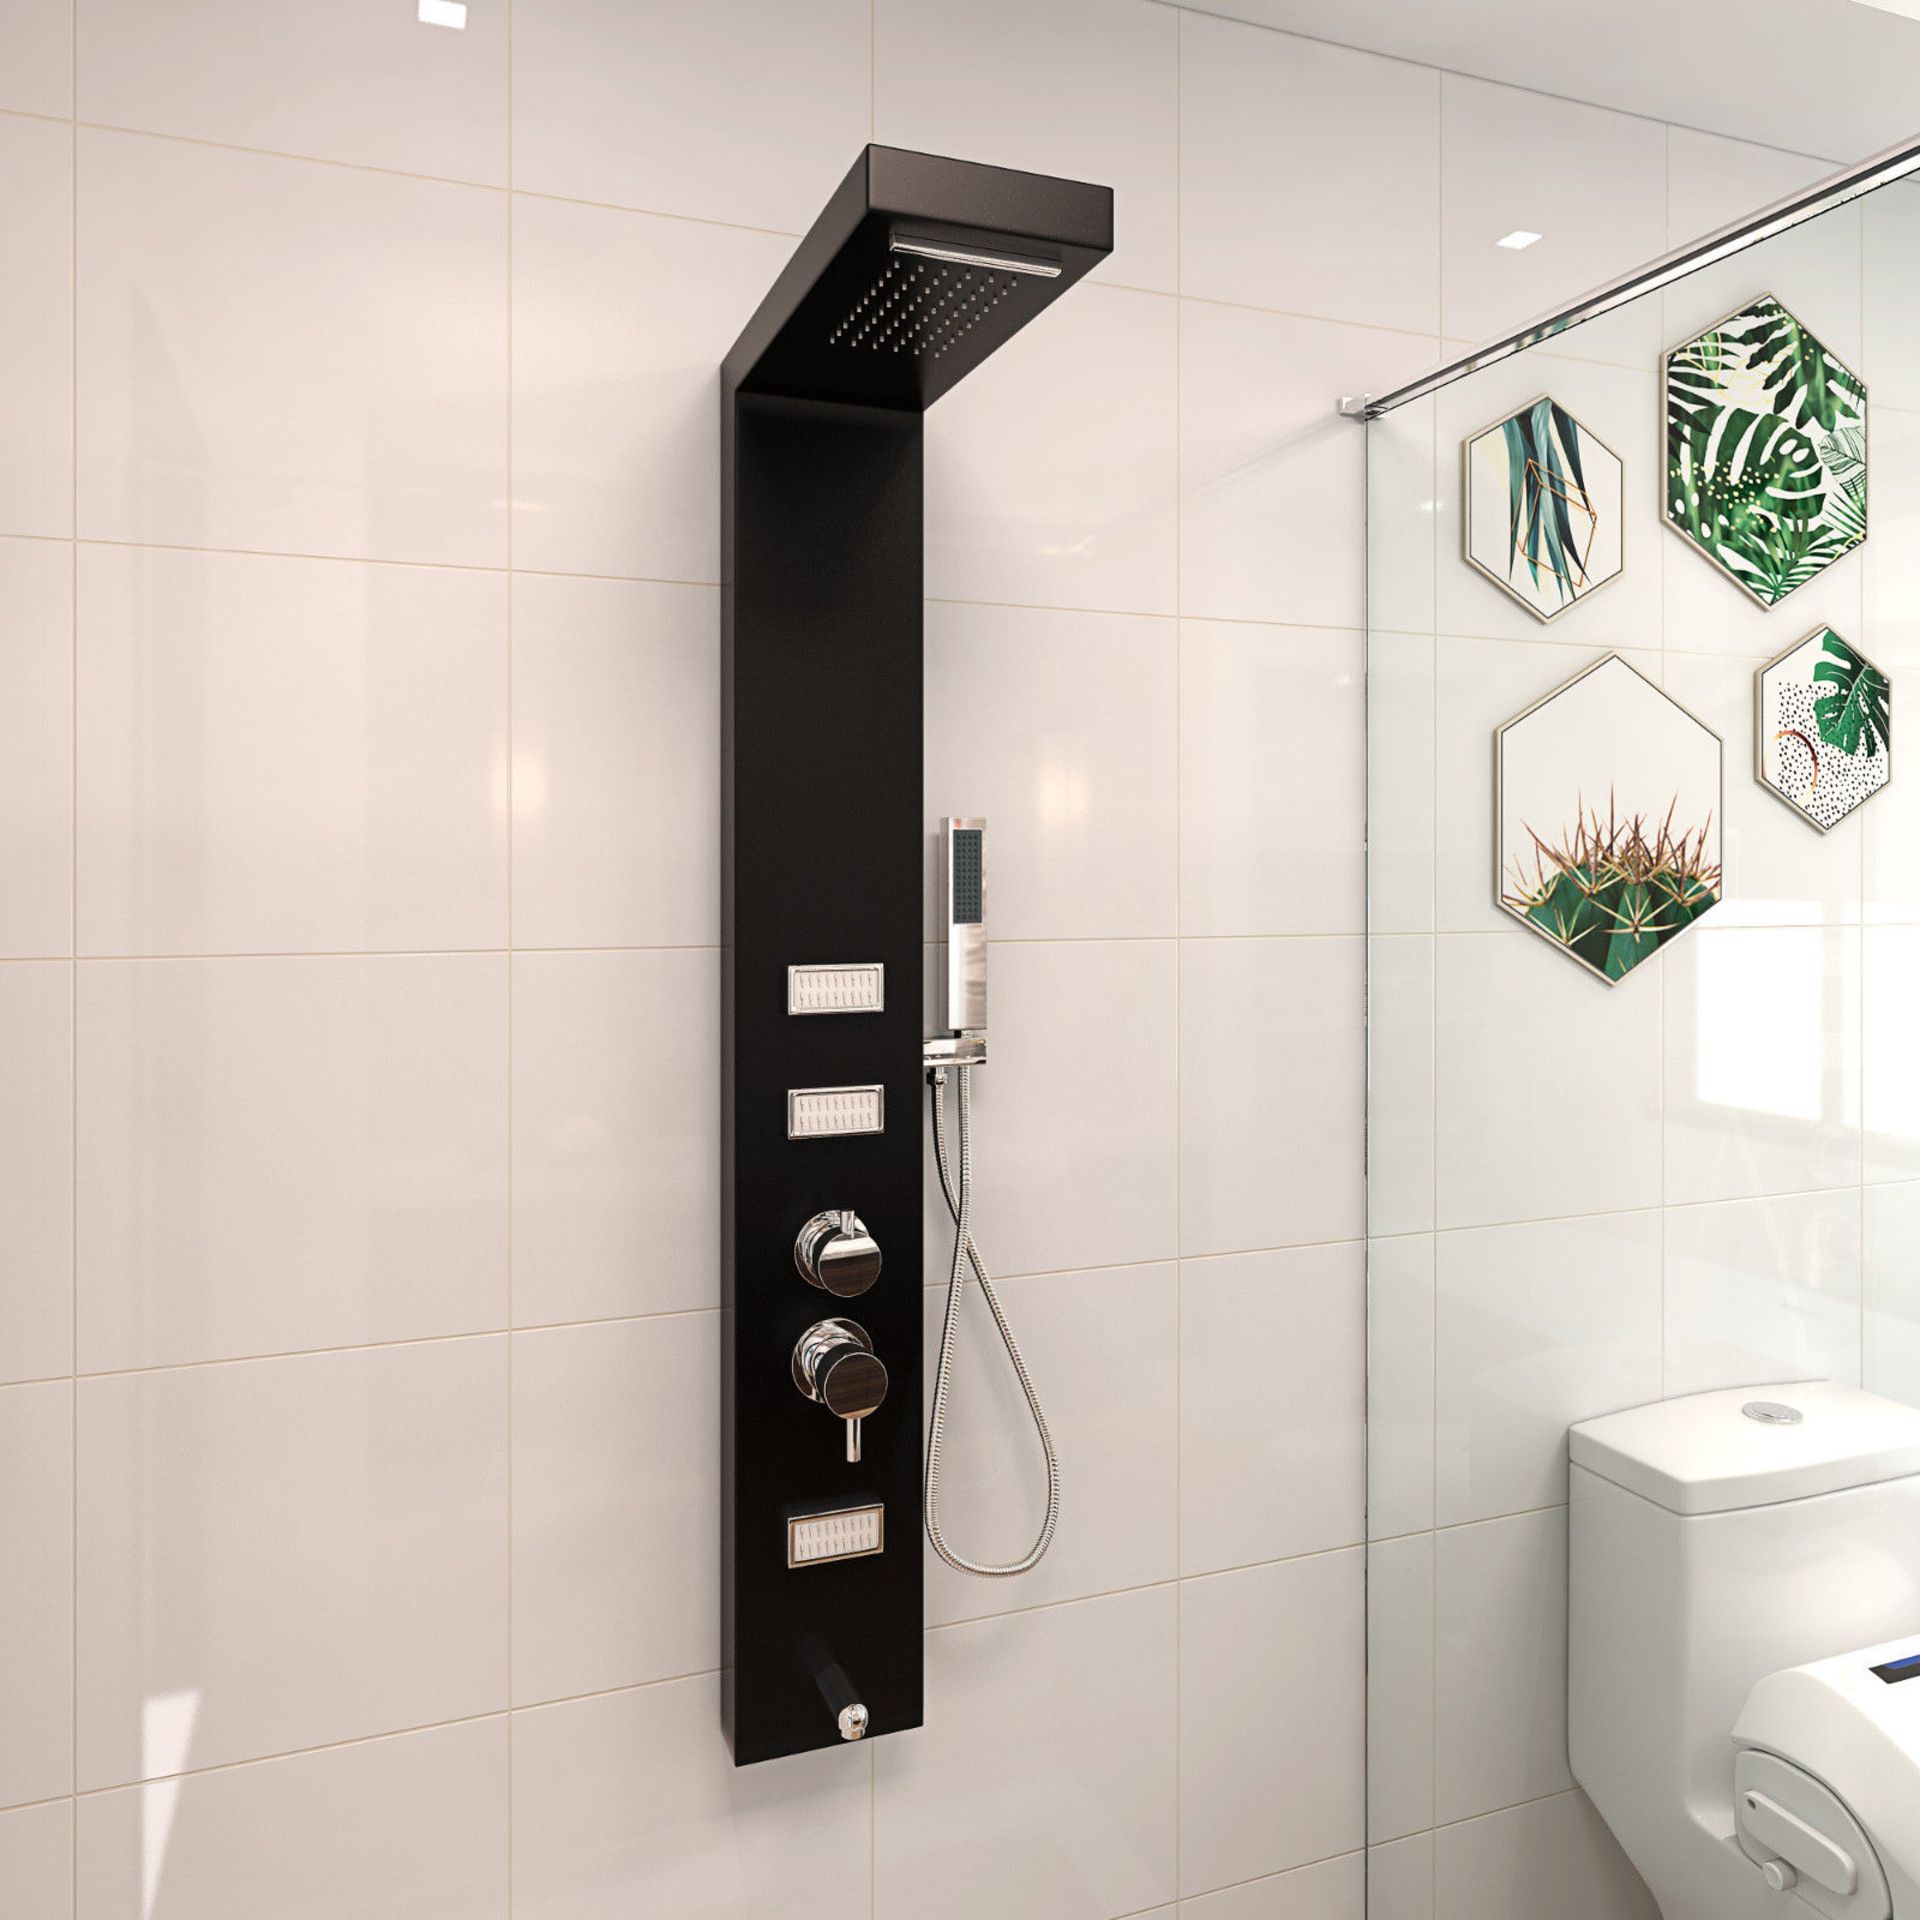 (XL5) Black Shower Towel Mixer Shower Panel With Massage Jets And Waterfall Shower. RRP £699.9... - Image 2 of 4